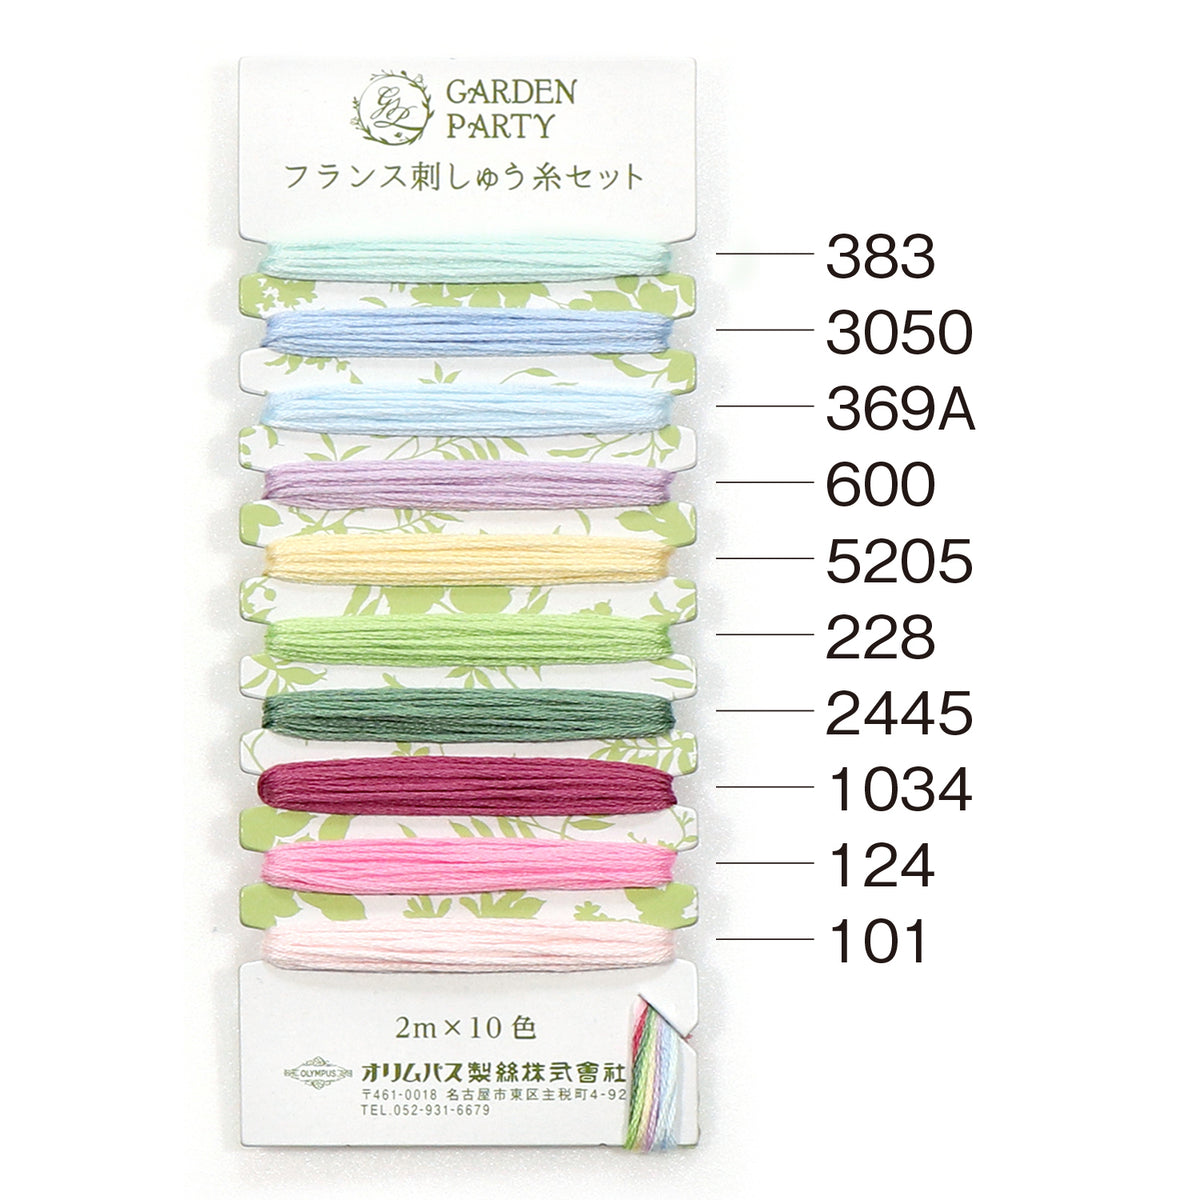 Olympus Garden Party Embroidery Floss Set